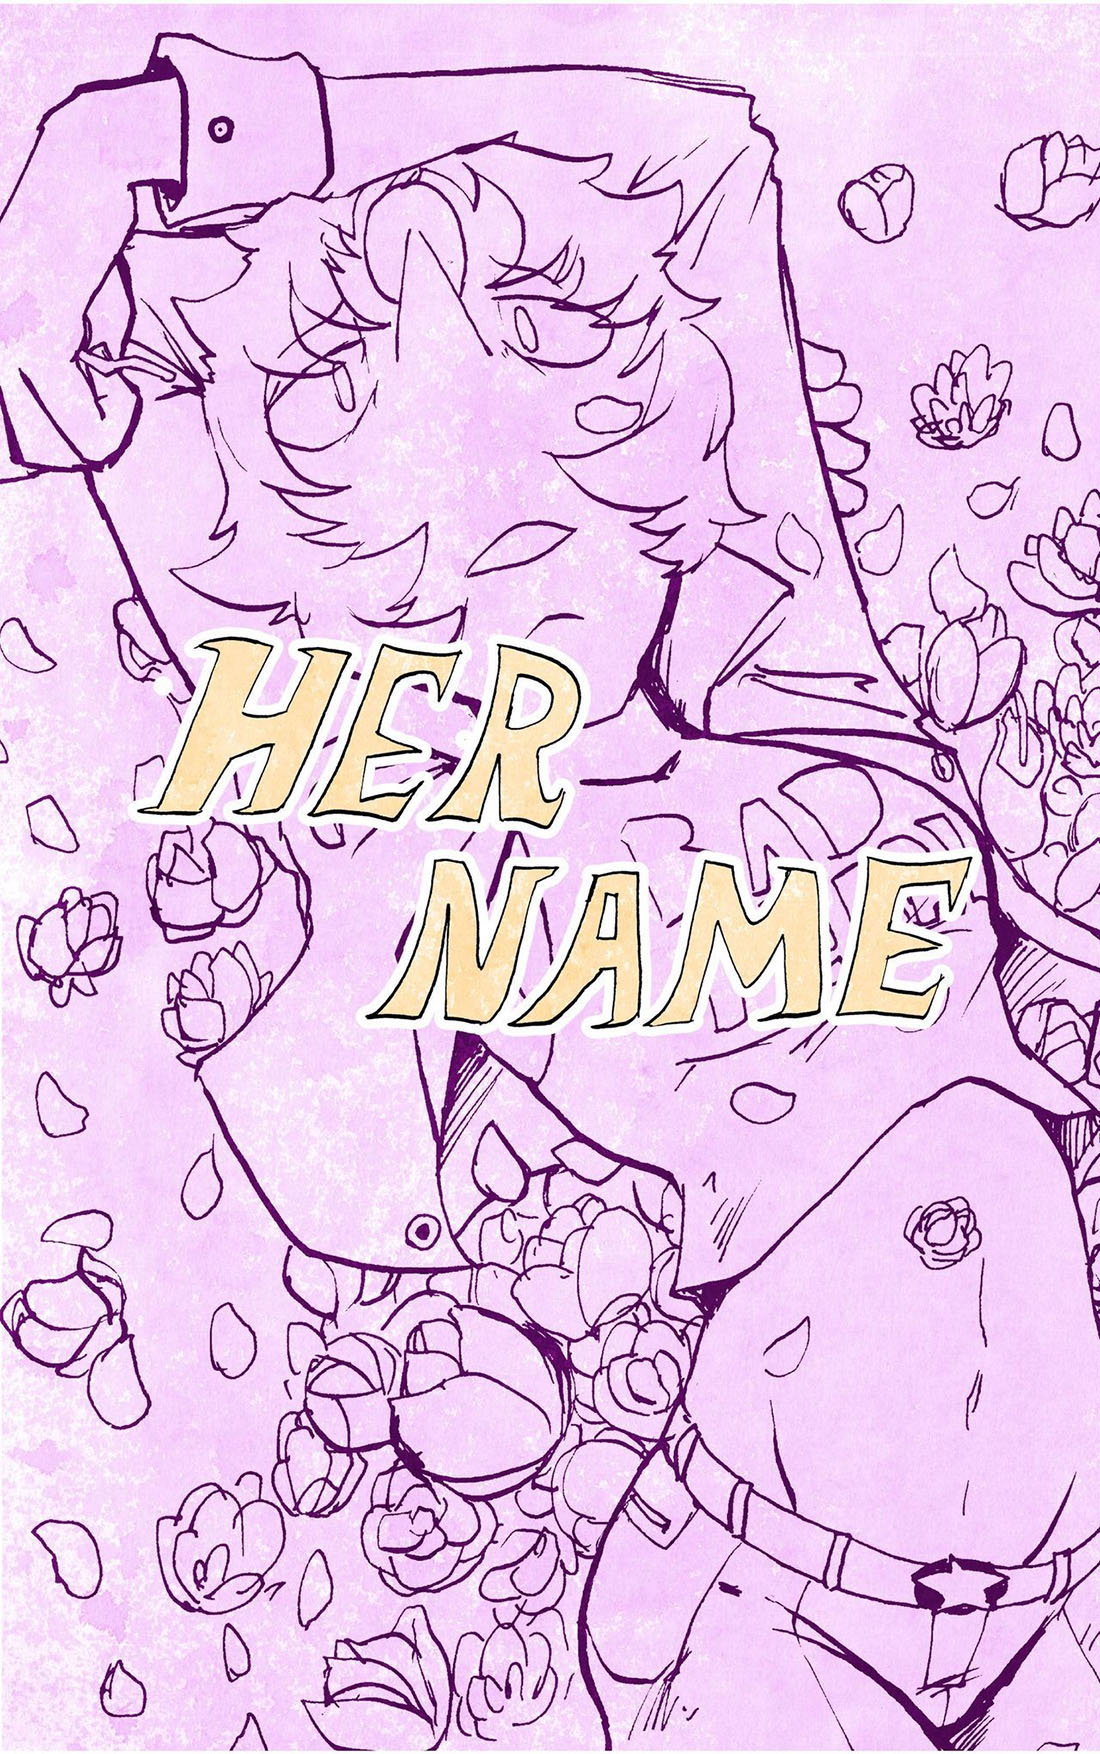 HER NAME